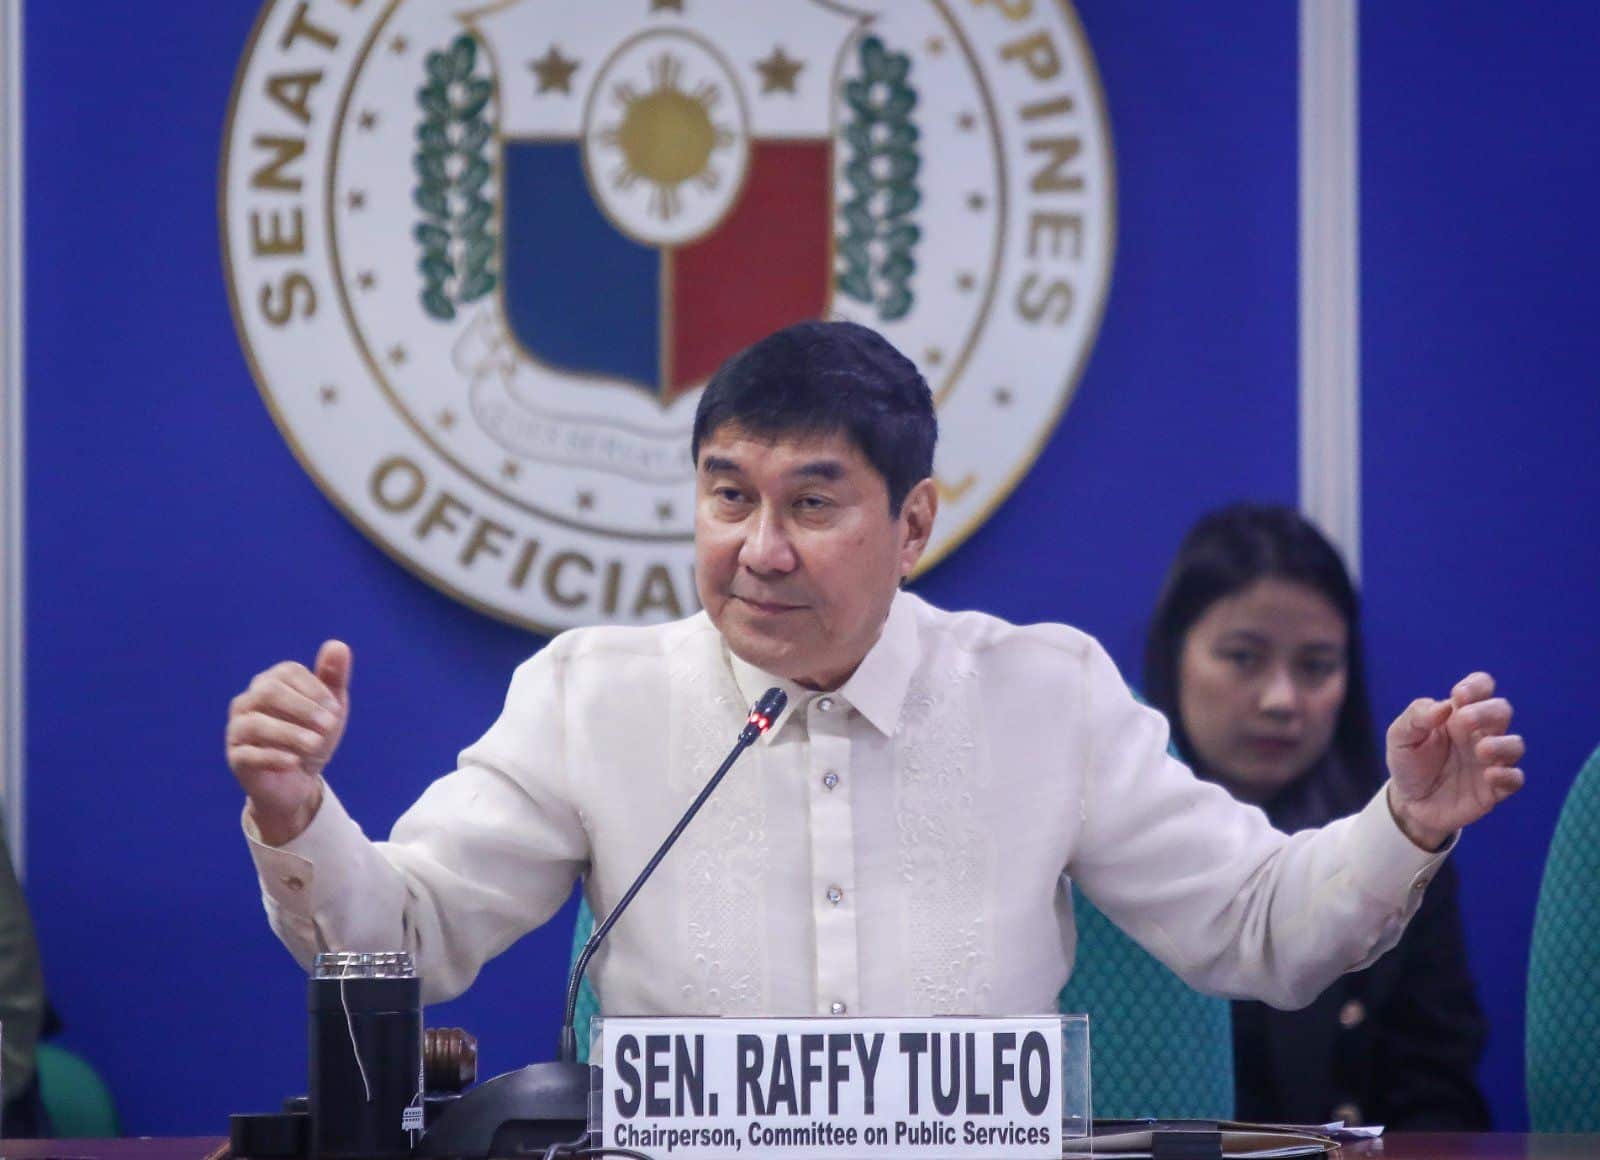 Two senators have asked the Toll Regulatory Board (TRB) to postpone the implementation of toll hikes for North Luzon Expressway (NLEx) and South Luzon Expressway (SLEx) this August until it resolves issues related to radio frequency identification (RFID).